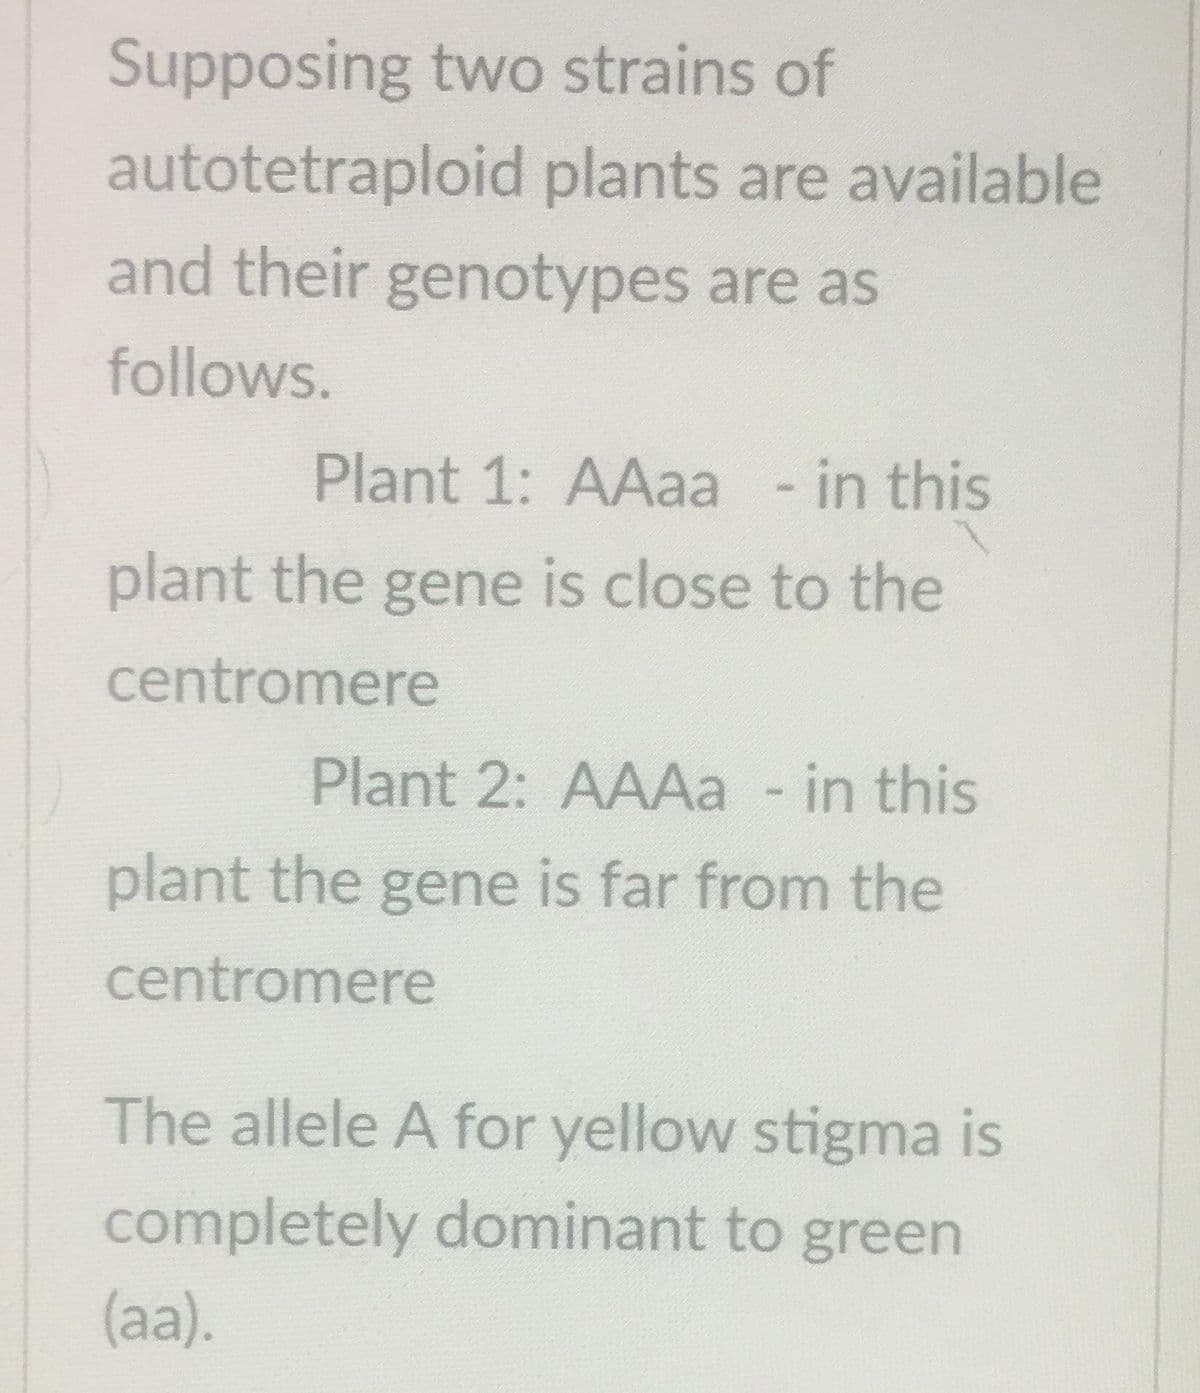 Supposing two strains of
autotetraploid plants are available
and their genotypes are as
follows.
Plant 1: AAaa - in this
plant the gene is close to the
centromere
Plant 2: AAAa - in this
plant the gene is far from the
centromere
The allele A for yellow stigma is
completely dominant to green
(aa).